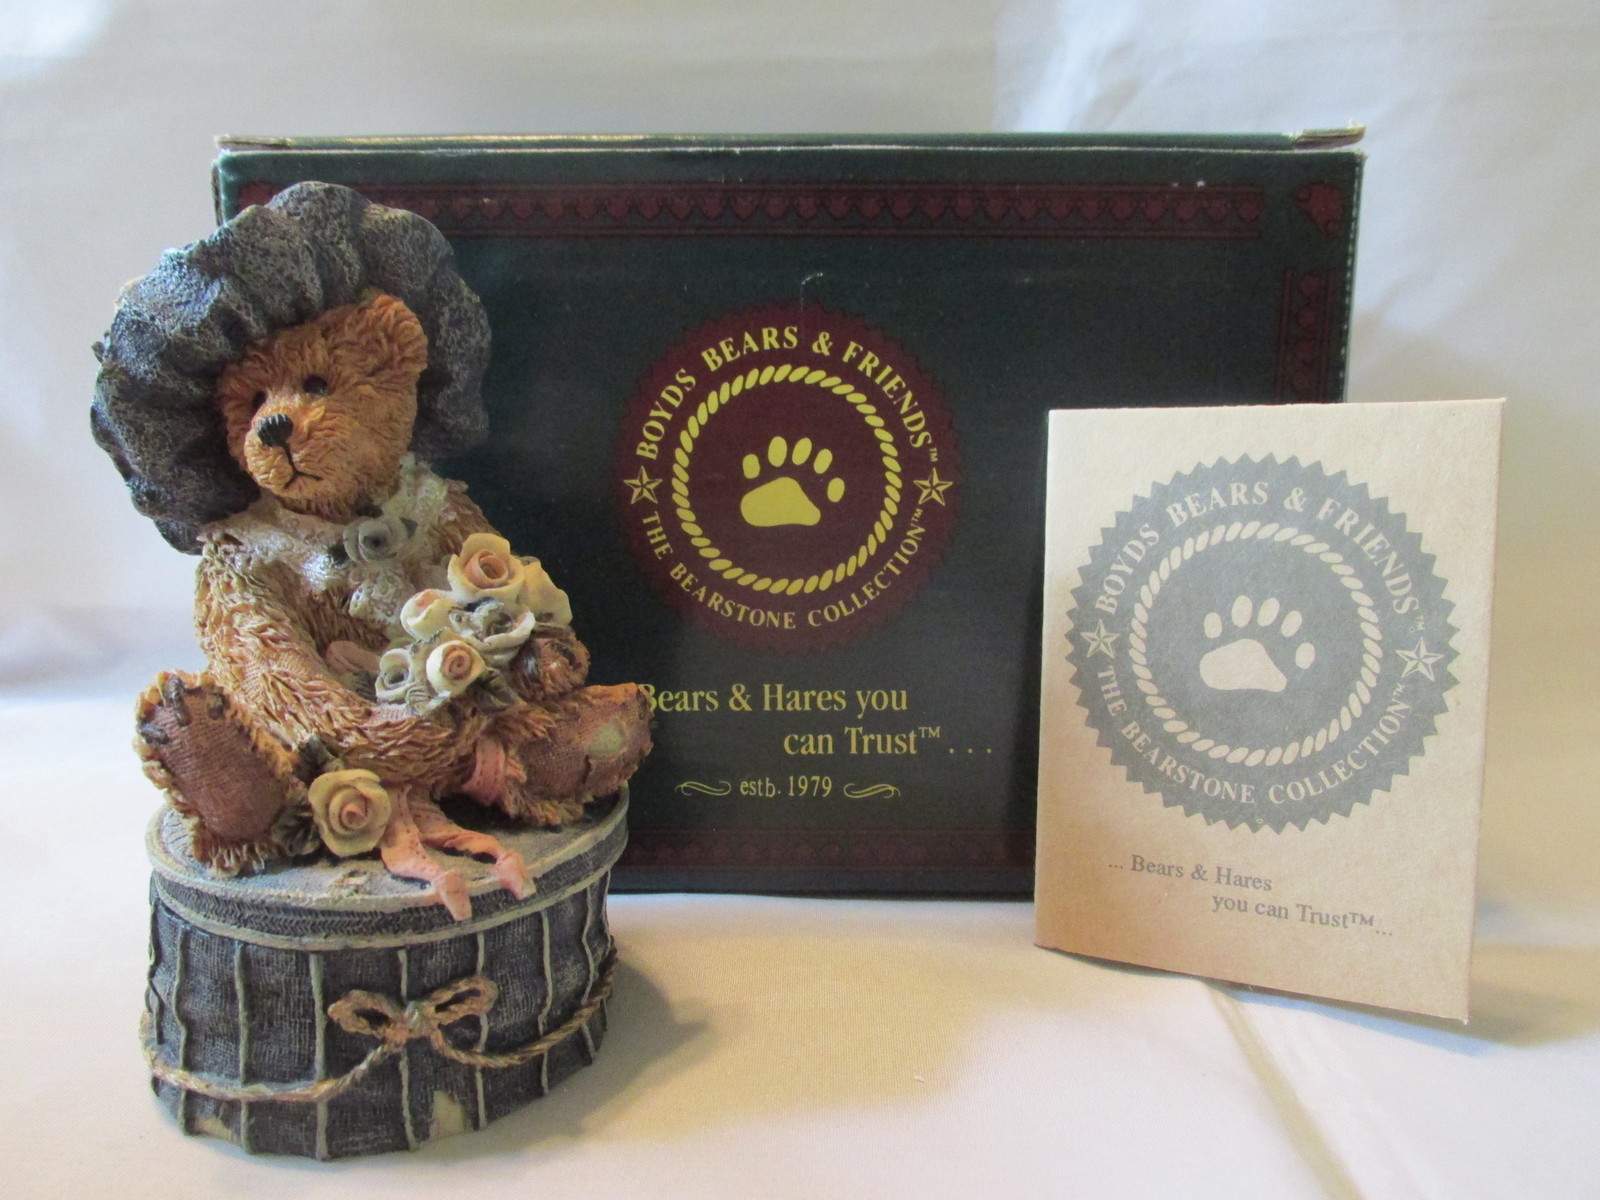 Boyds Bears & Friends "Victoria...The Lady", Small Trinket Box 1993 Box Included - $14.99